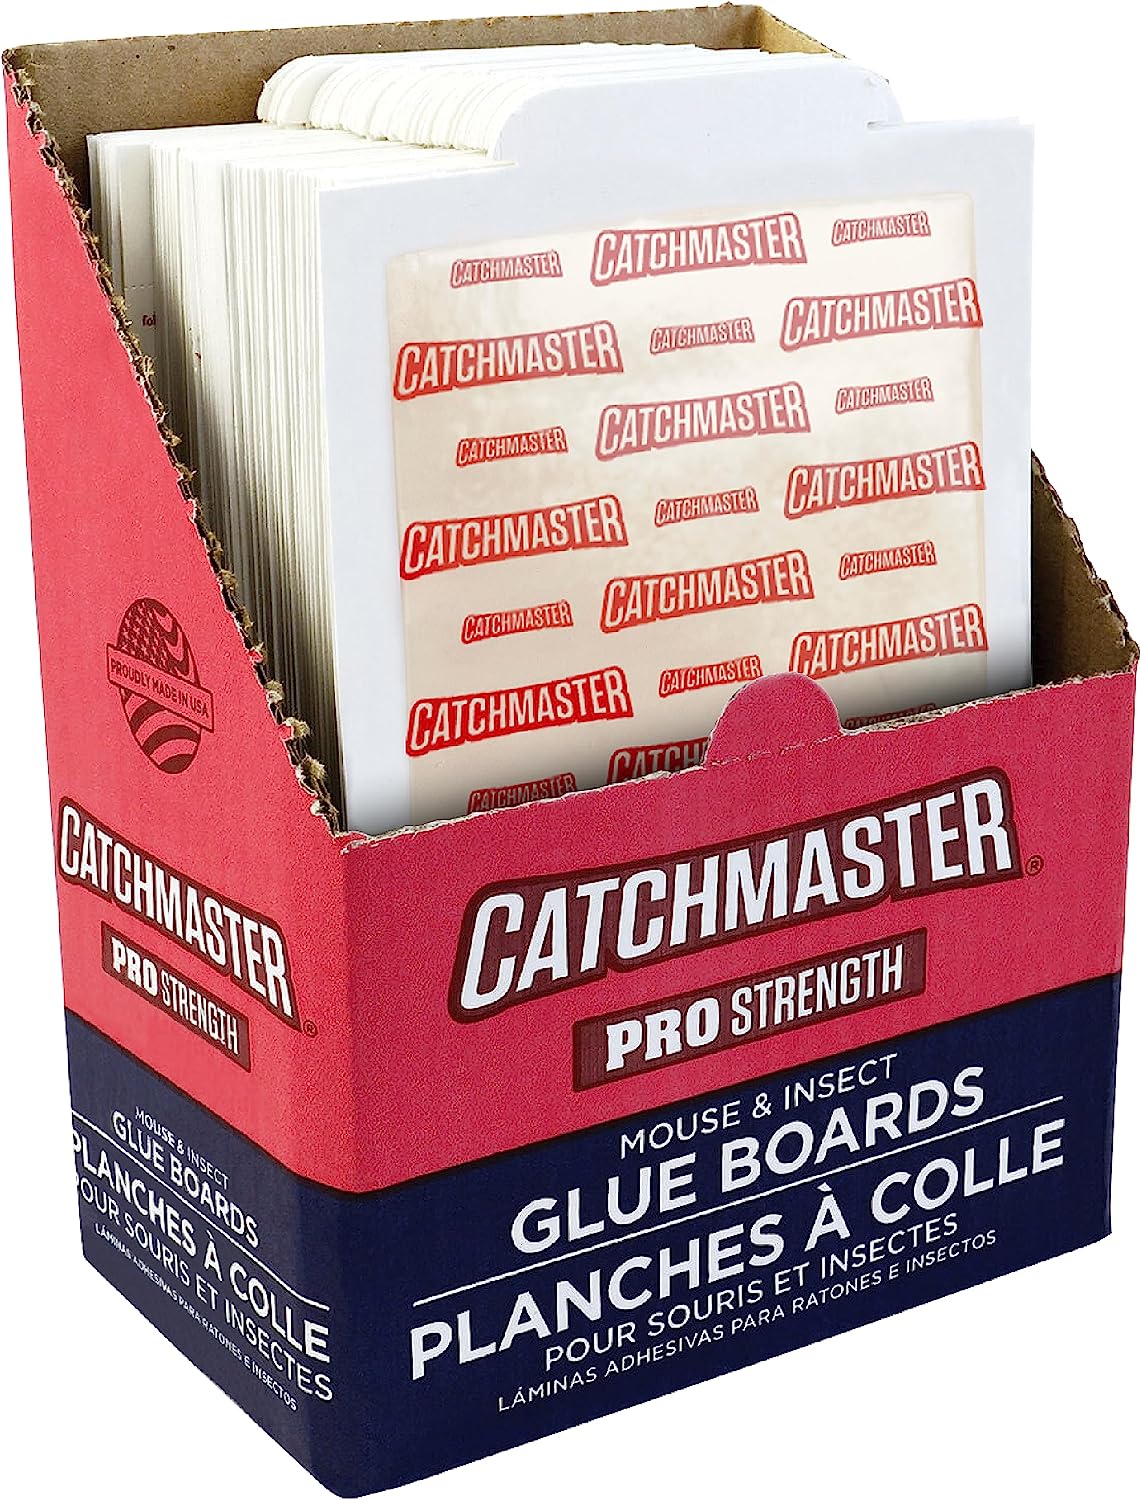 60M Packed Glue Boards by Catchmaster - 60 Traps Pre- [...]